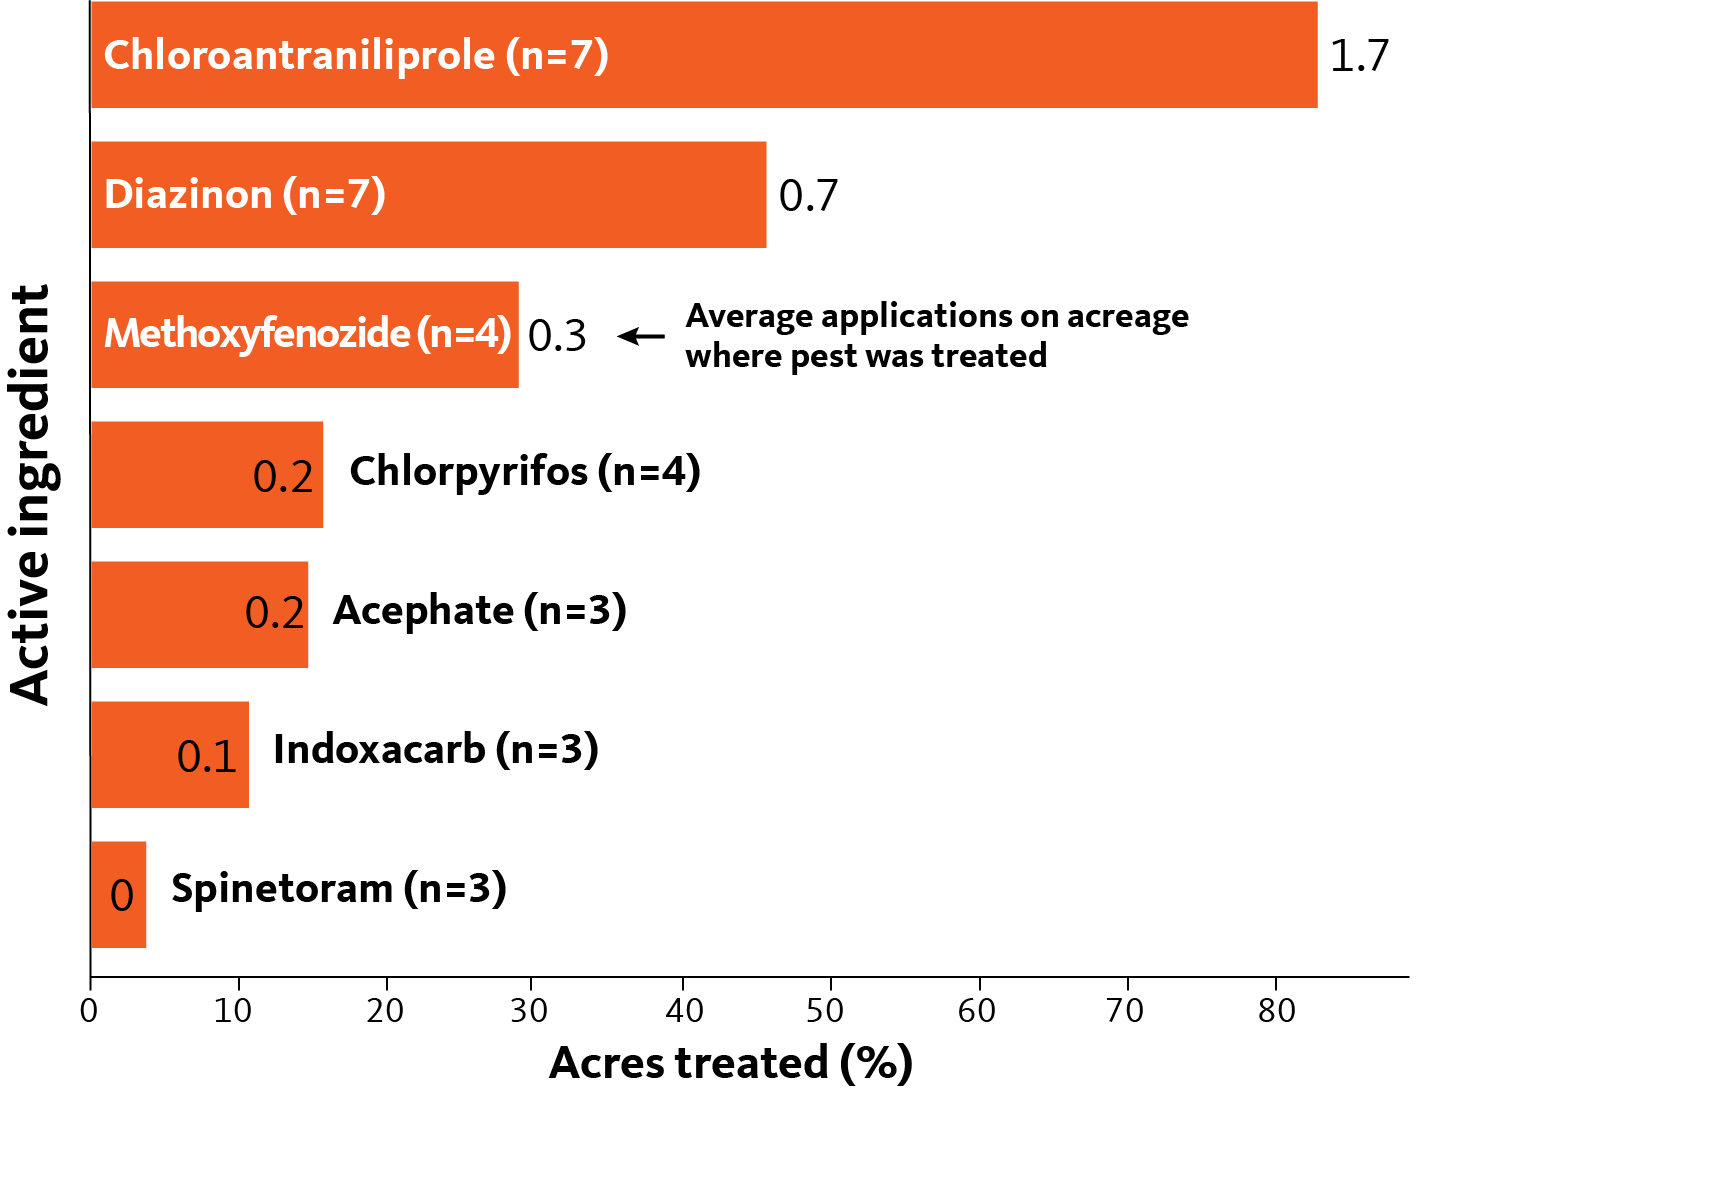 Bar chart showing leading insecticides